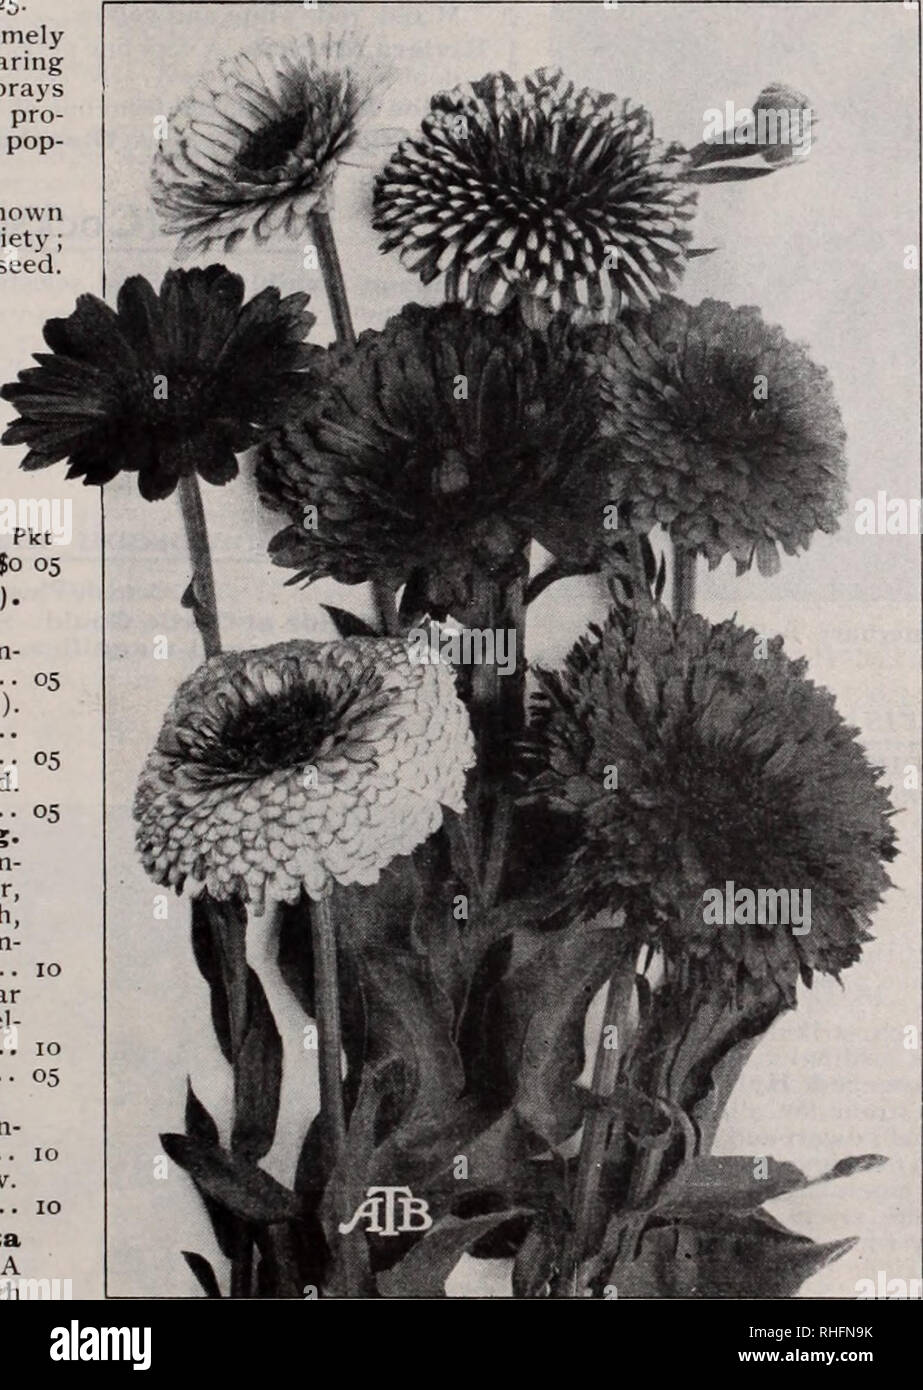 . Boddington's quality bulbs, seeds and plants / Arthur T. Boddington.. Nursery Catalogue. BODDINGTON'S &quot;&quot;^^^^/i:?^^^ S EED&quot;s 19 Glory. Calceolaria Hybrida, Boddington's Perfection The herbaceous Calceolaria is an easily cultivated plant. So long as frost is excluded from the plants in winter they are perfectly safe, and to attempt to hasten growth at any time is a failure. July is the best month for sowing the seed. The great advance made in the habit of the strains offered is remarkable, whilst in the colors there is a marked improvement. Saved by England's most famous spe- ci Stock Photo